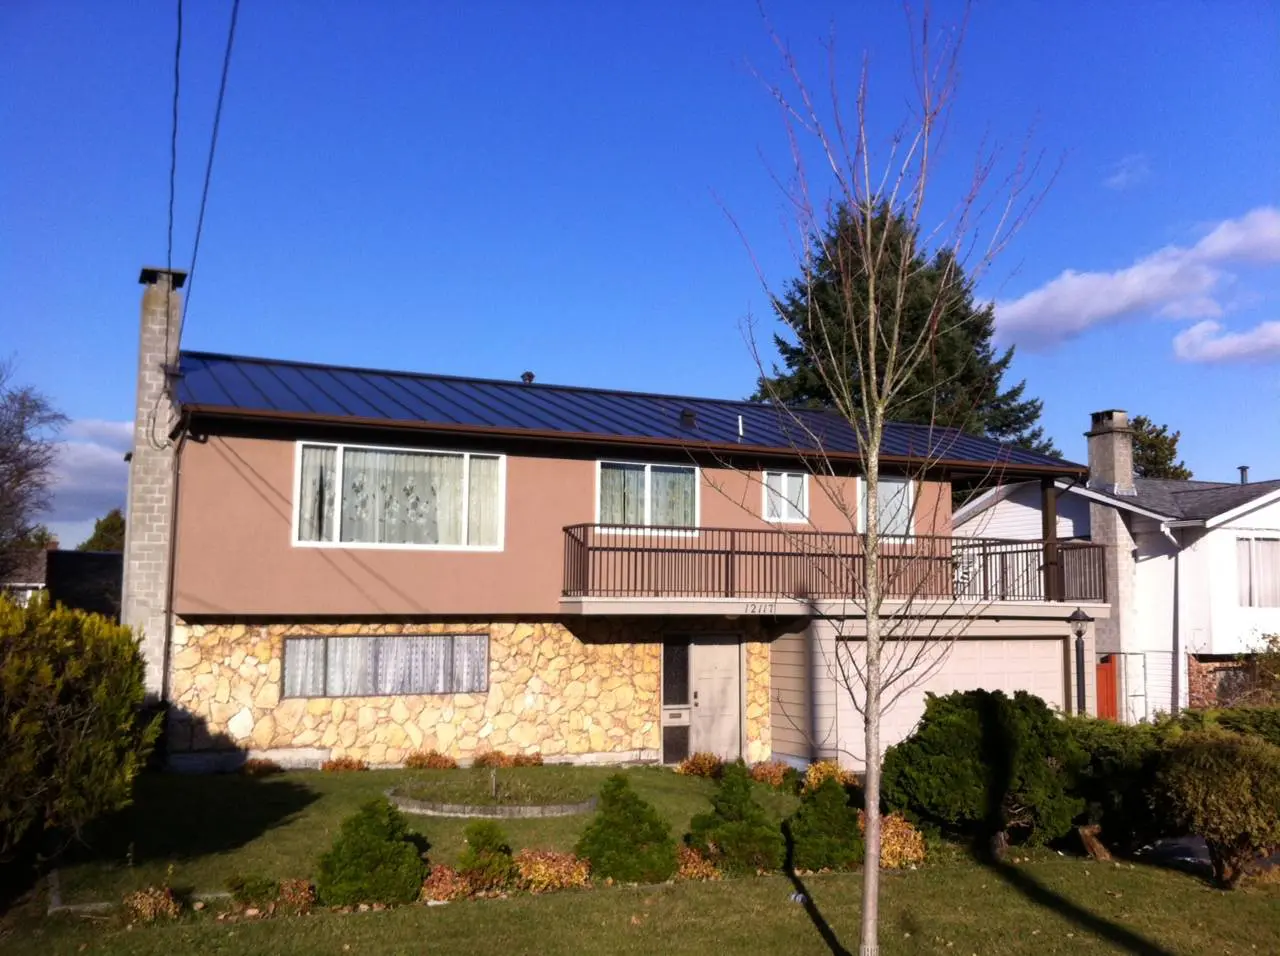 A house with a solar panel on the roof.